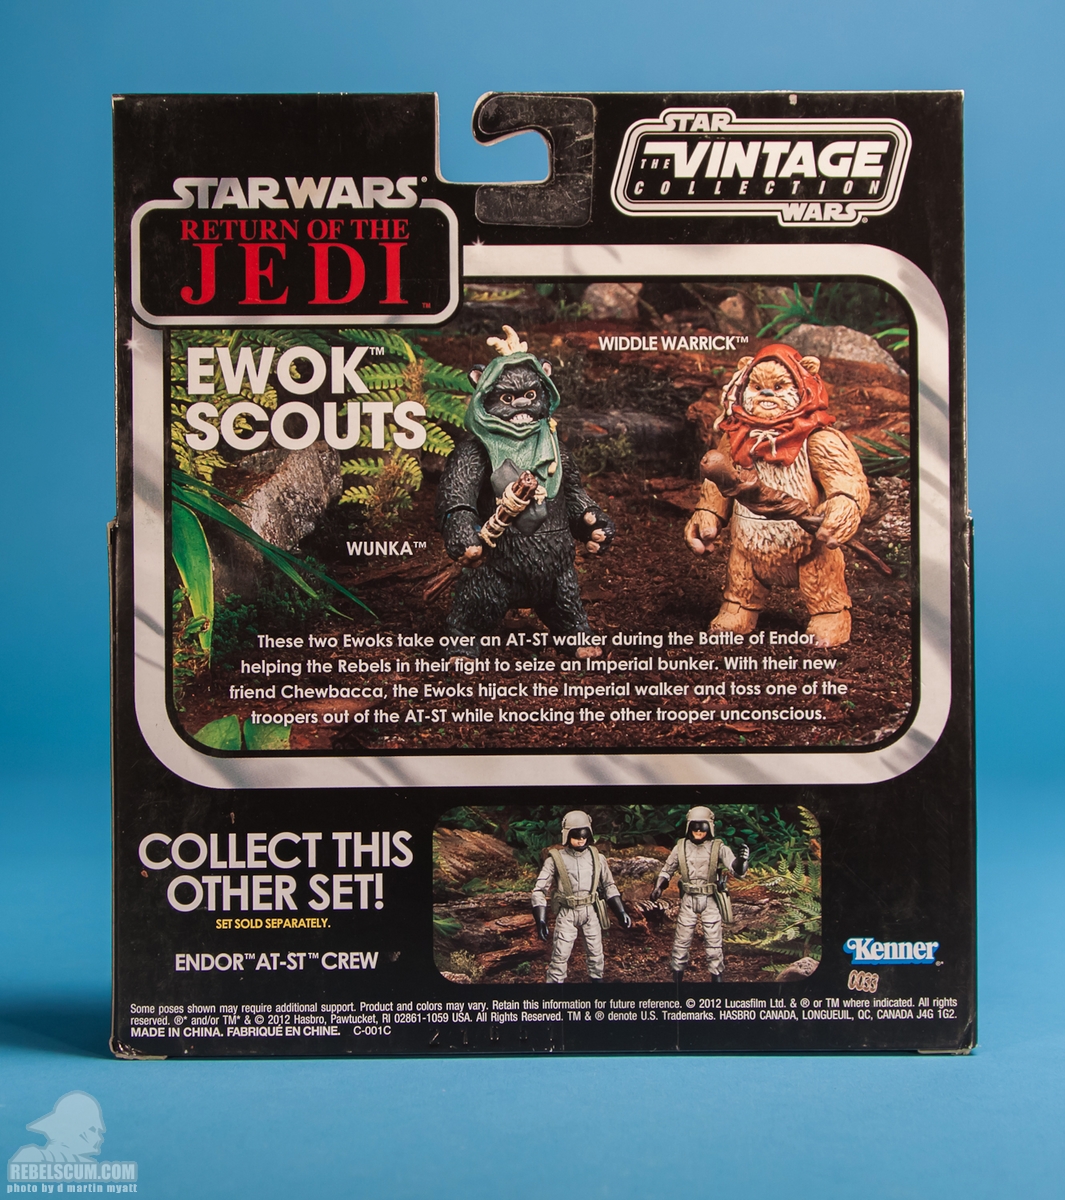 Ewok_Scouts_The_Vintage_Collection_TVC_Kmart-48.jpg